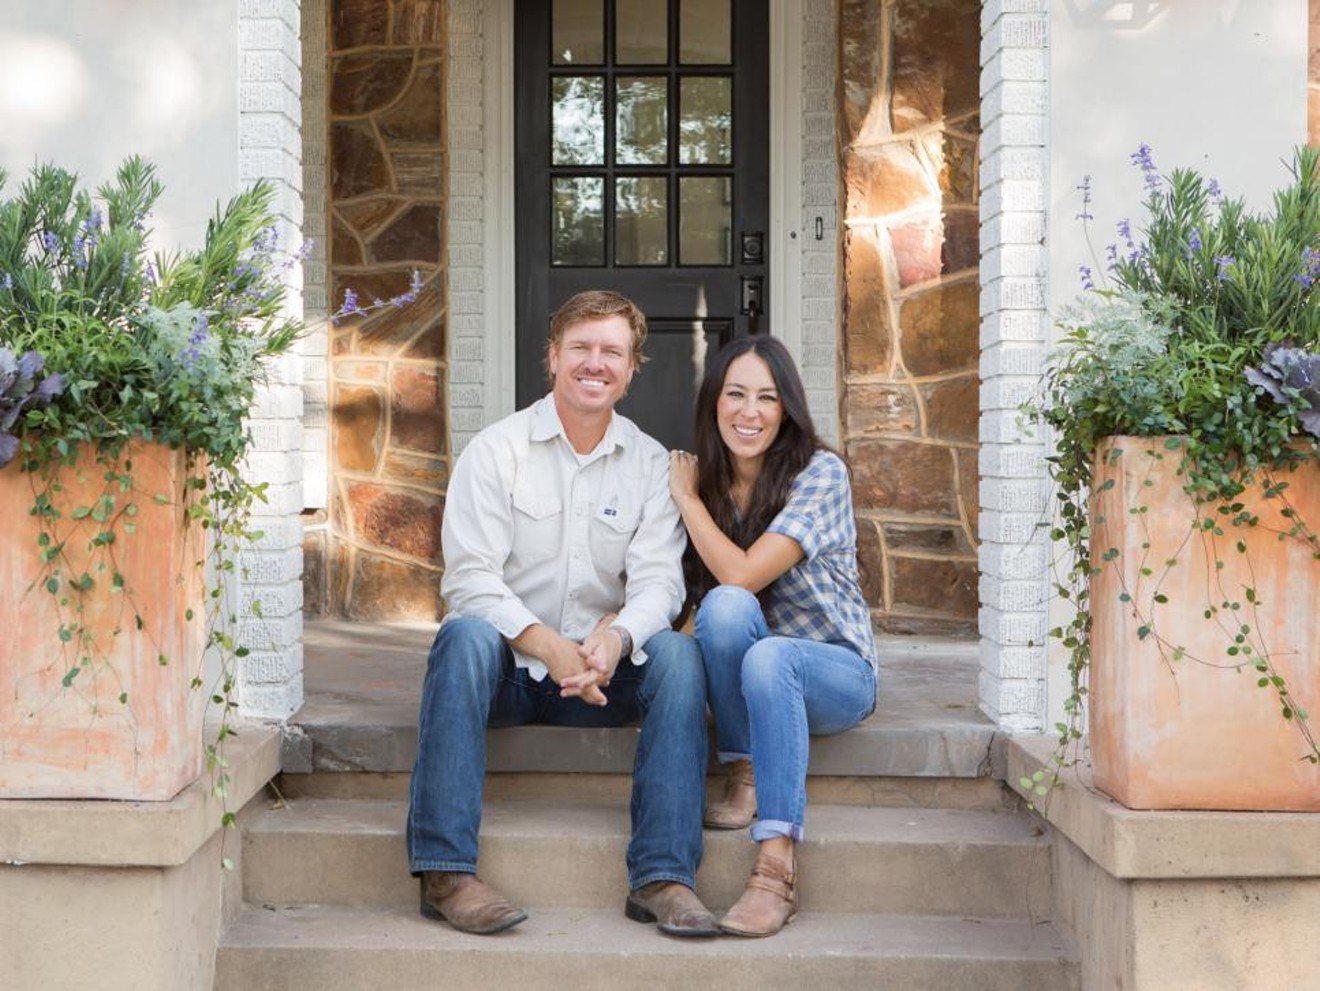 Chip and Joanna Gaines, hosts of Fixer Upper, yesterday announced the latest step in their plan for worldwide domination.